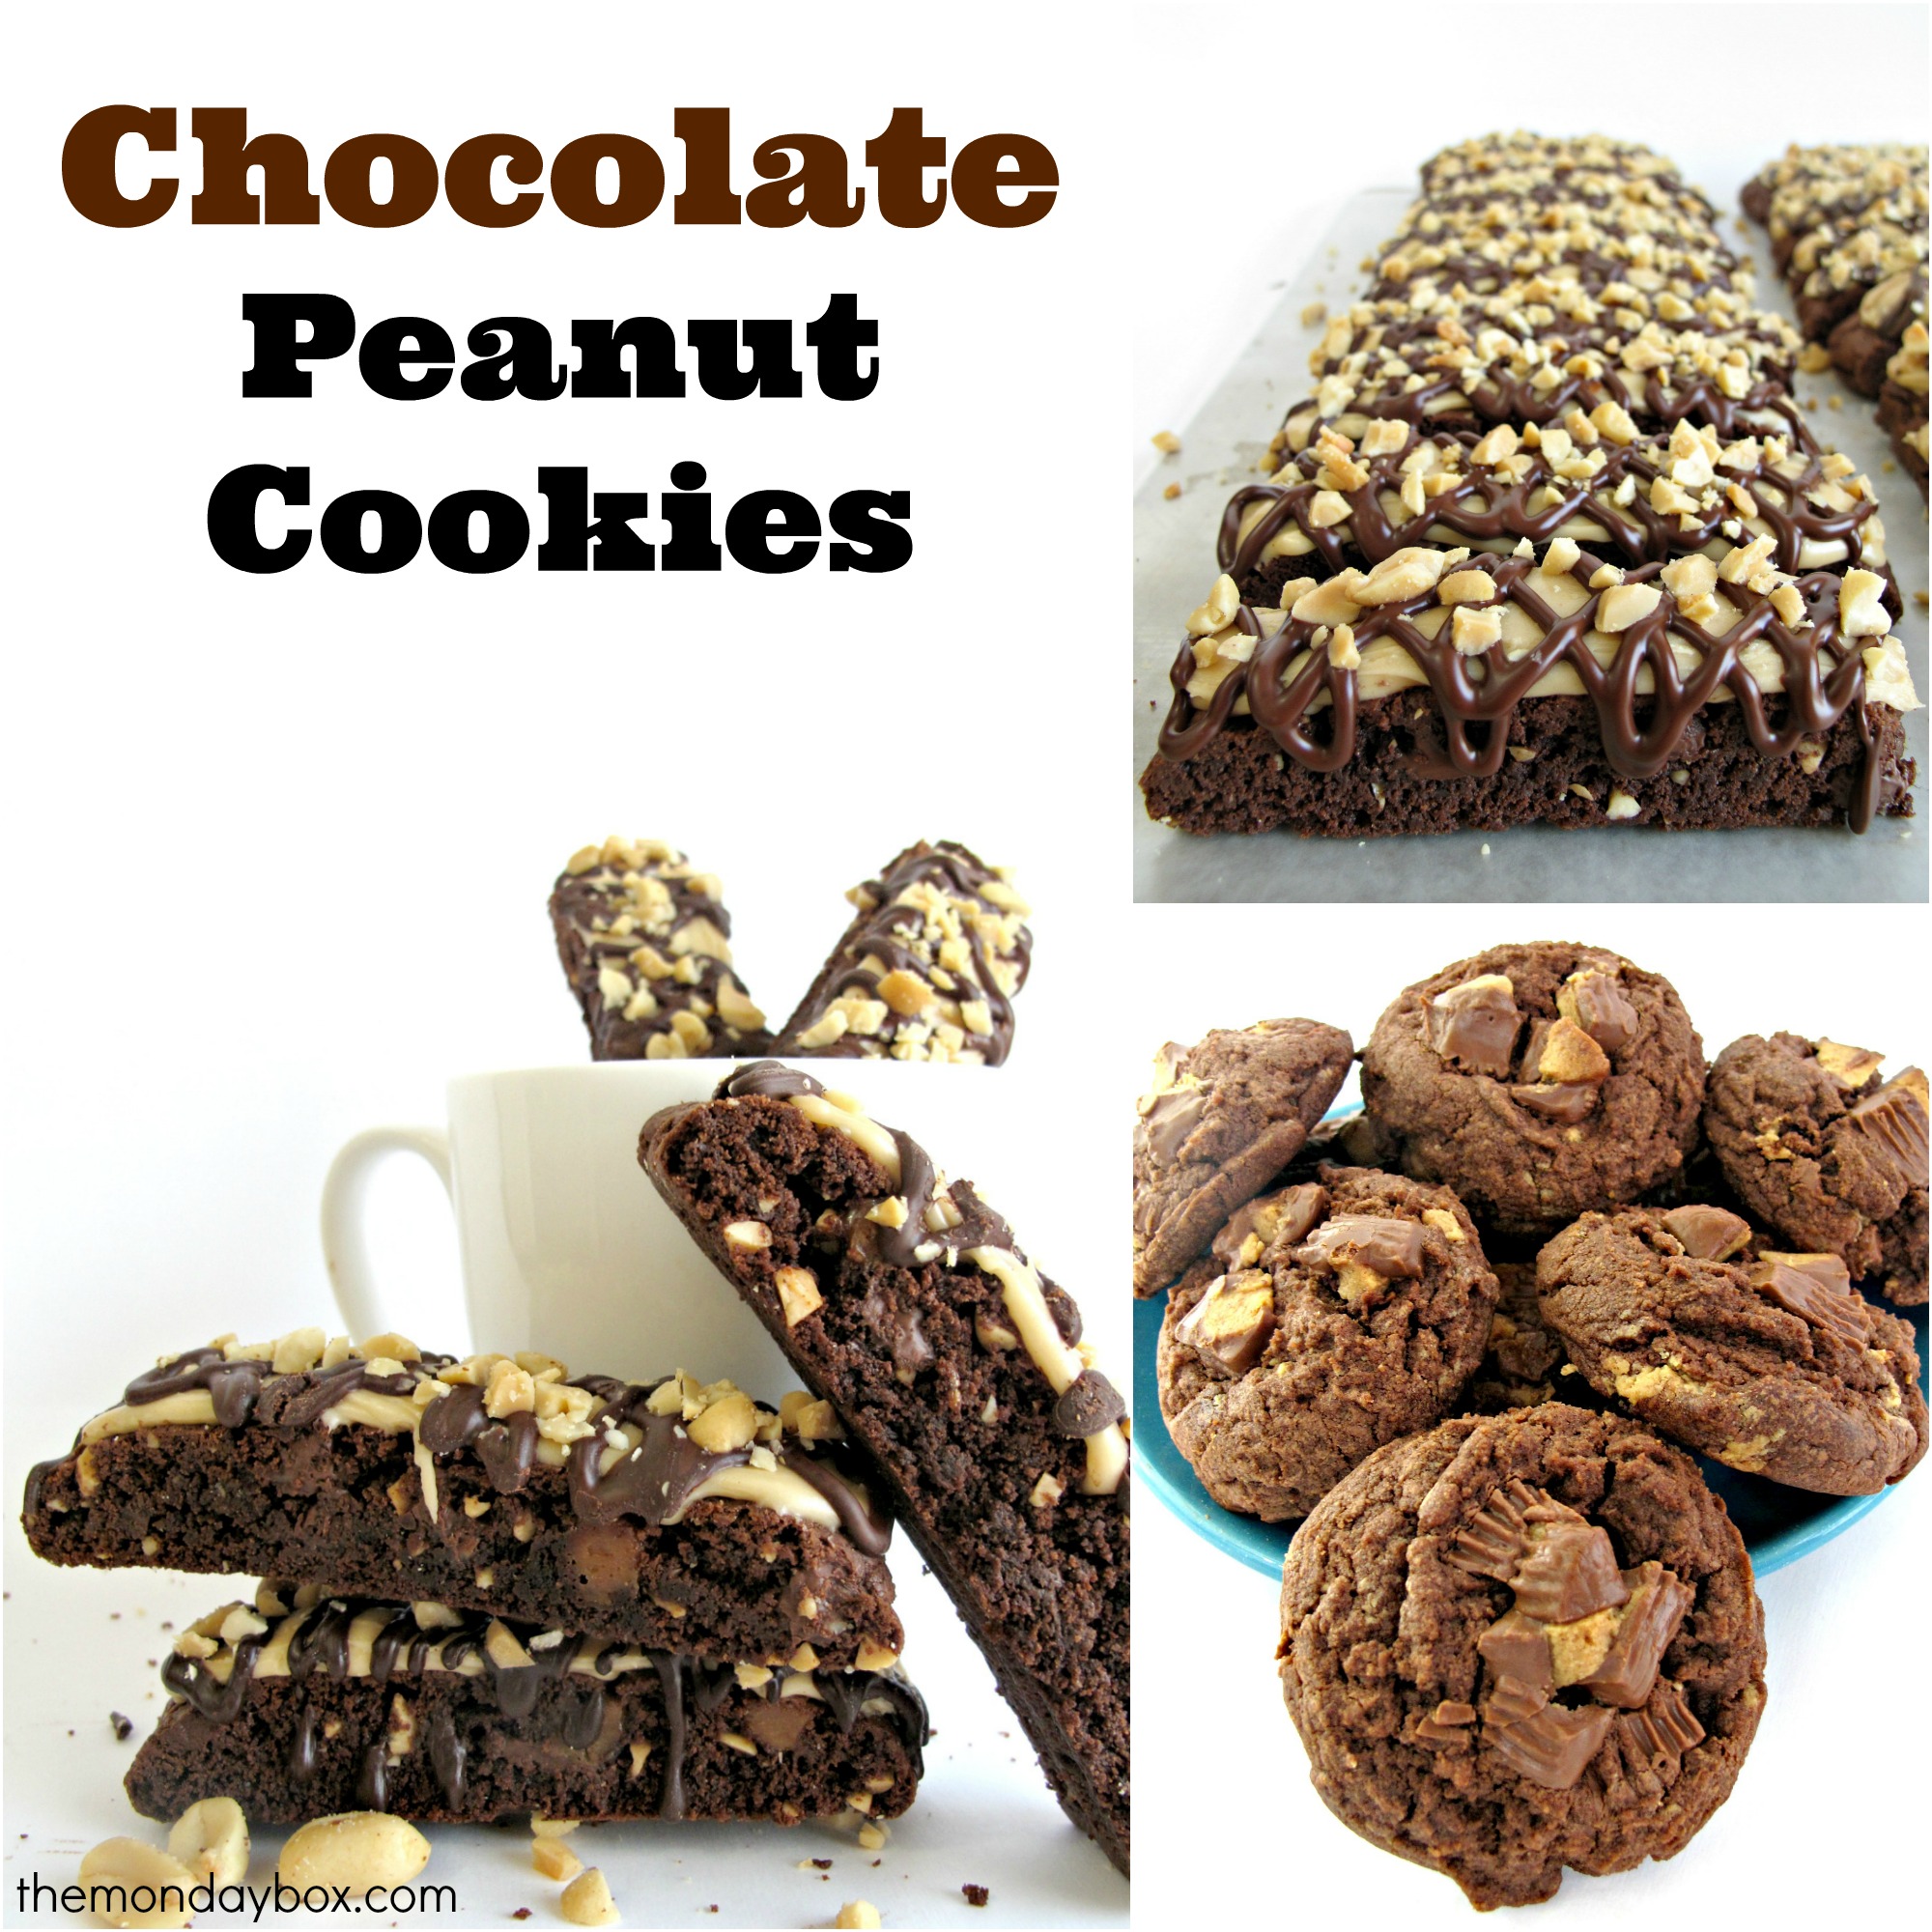 Chocolate Peanut Cookies collage showing Snickers Biscotti and Chocolate Peanut Butter Cup Cookies.